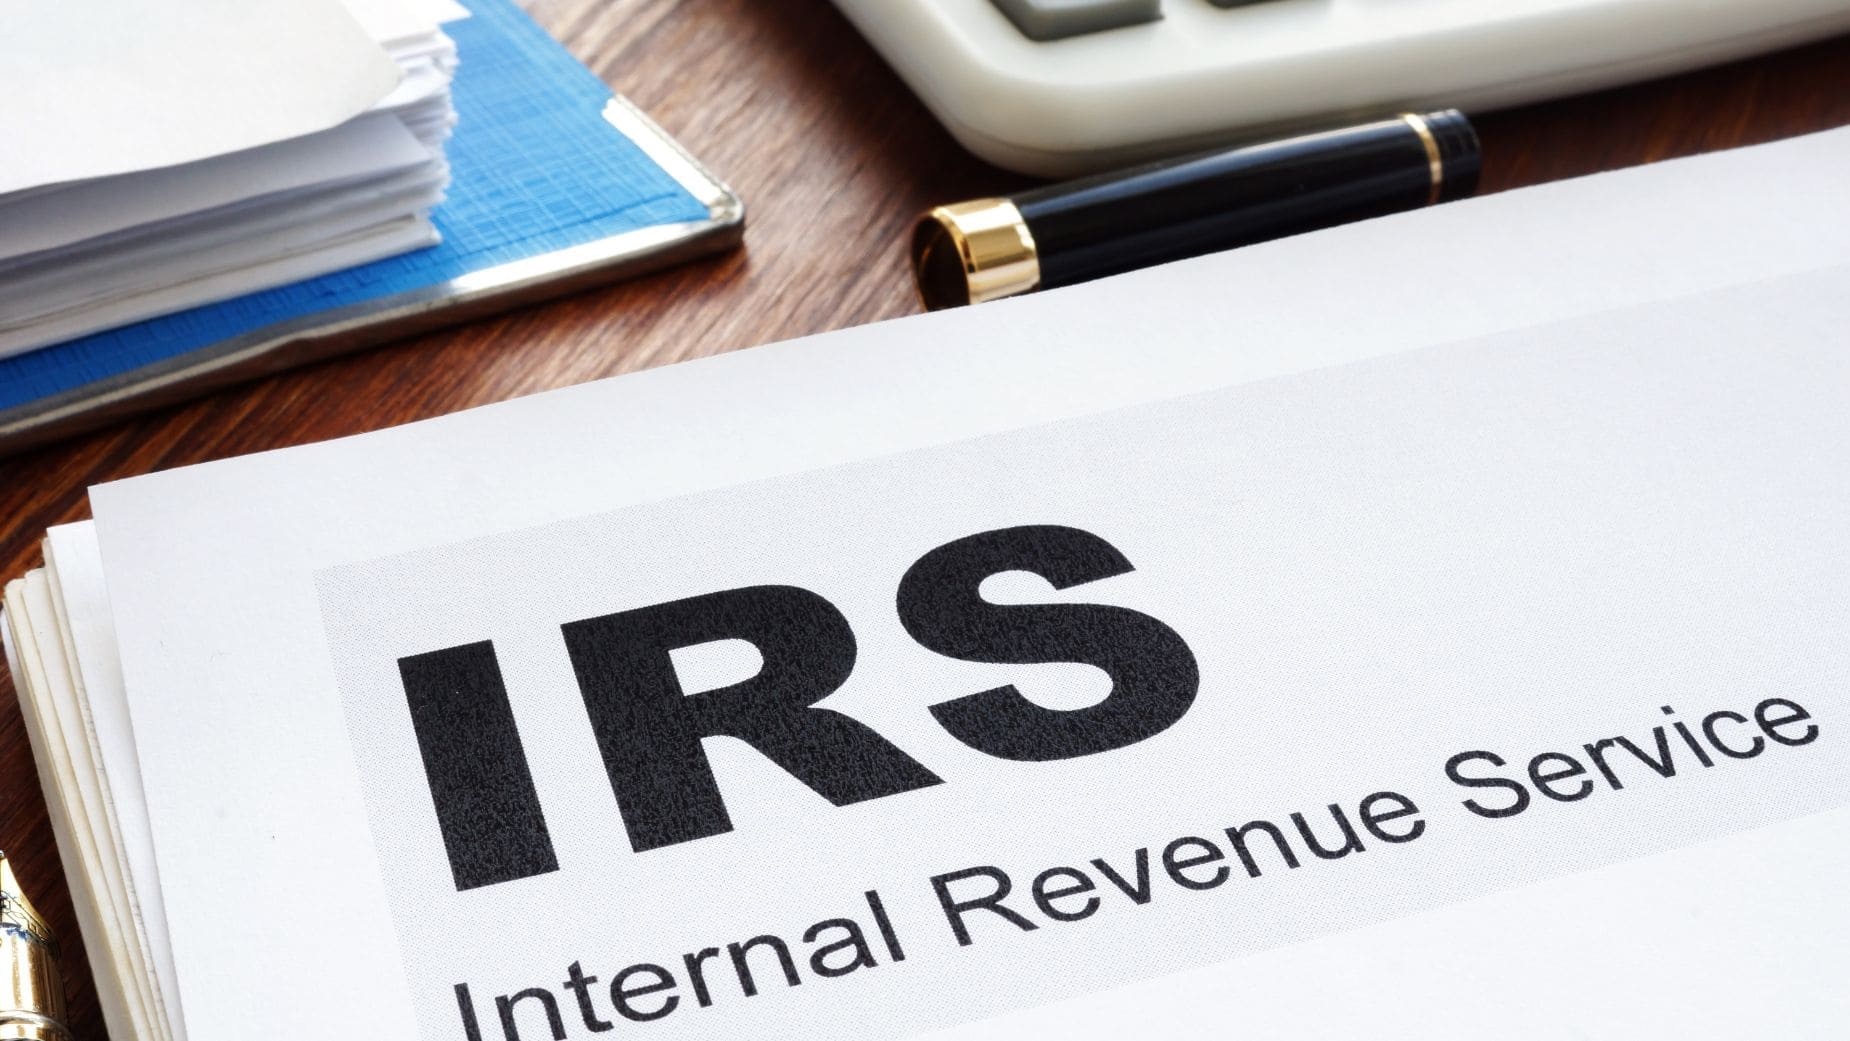 The stimulus check from the IRS will arrive as soon as we send the Tax Return